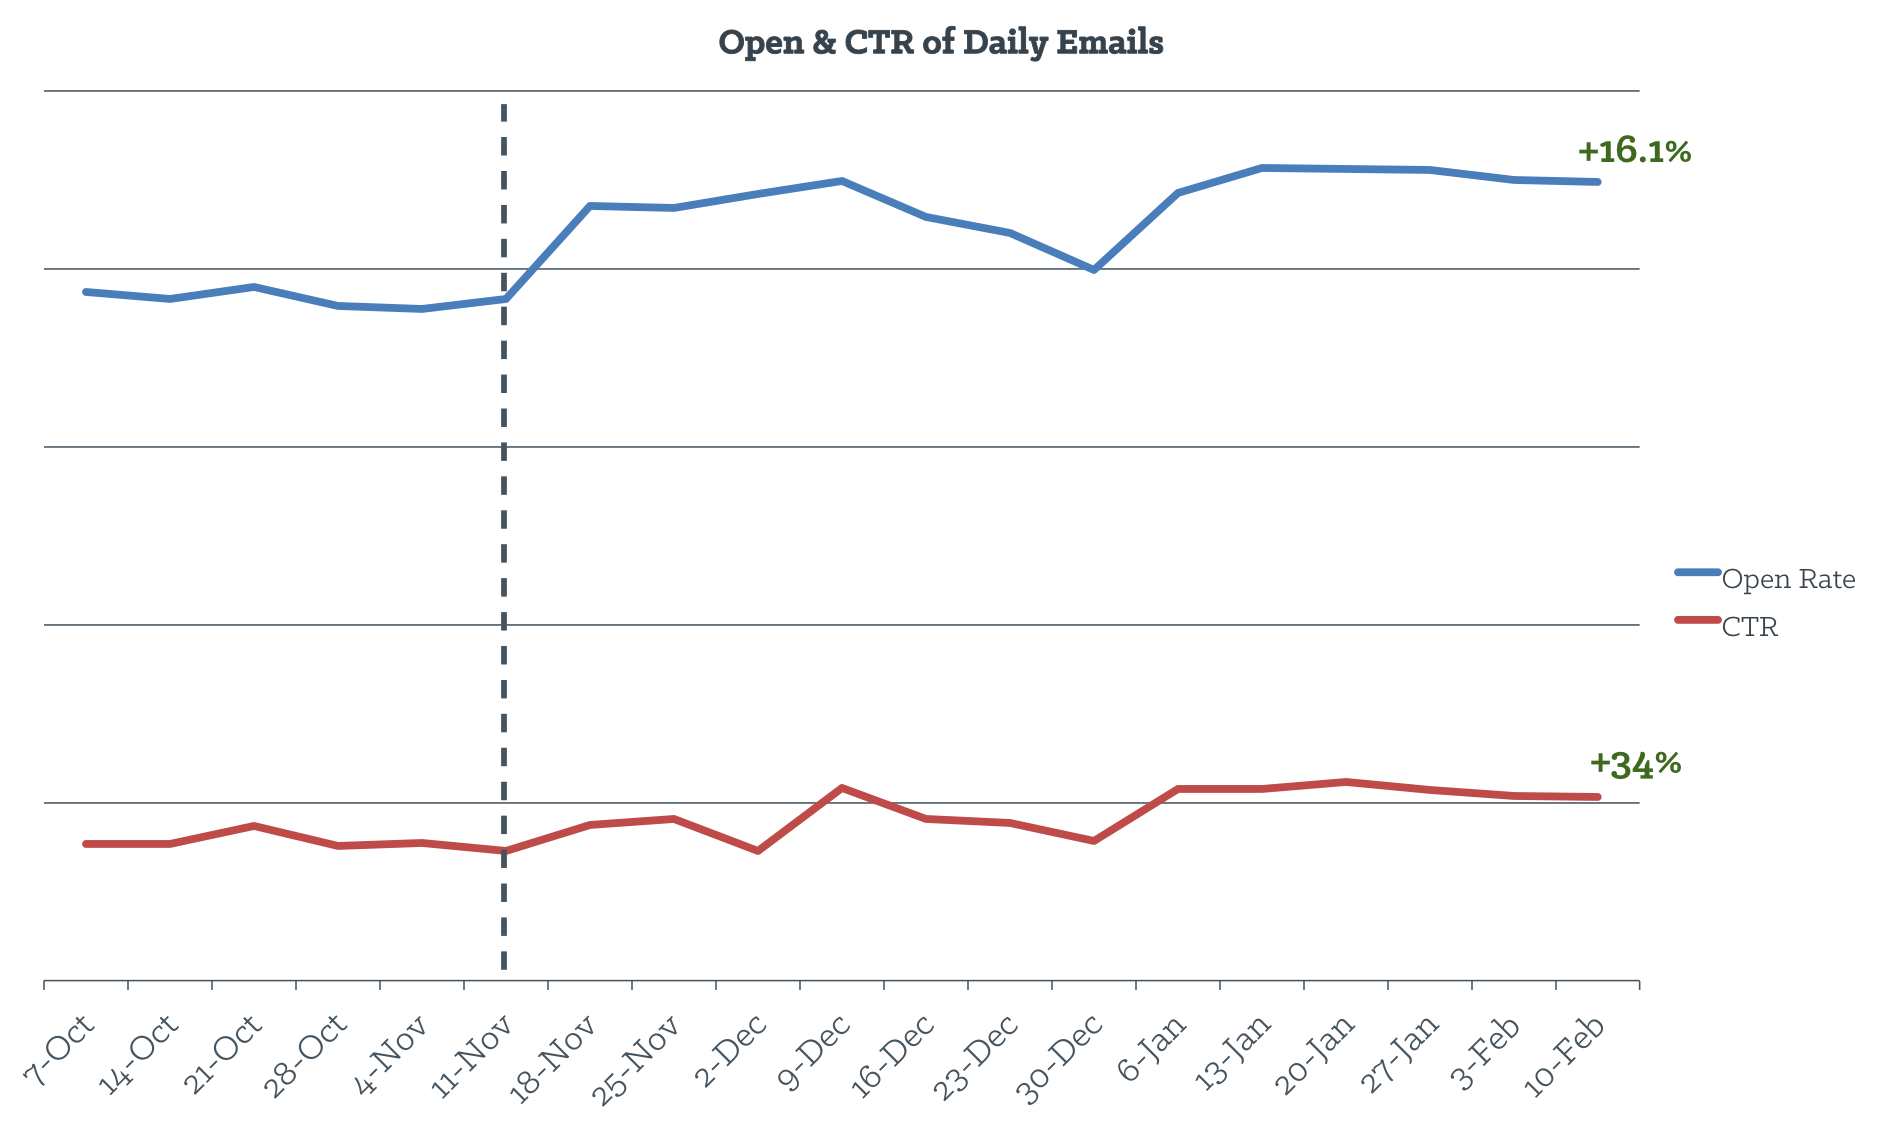 open_rate_and_ctr_of_daily_emails.png